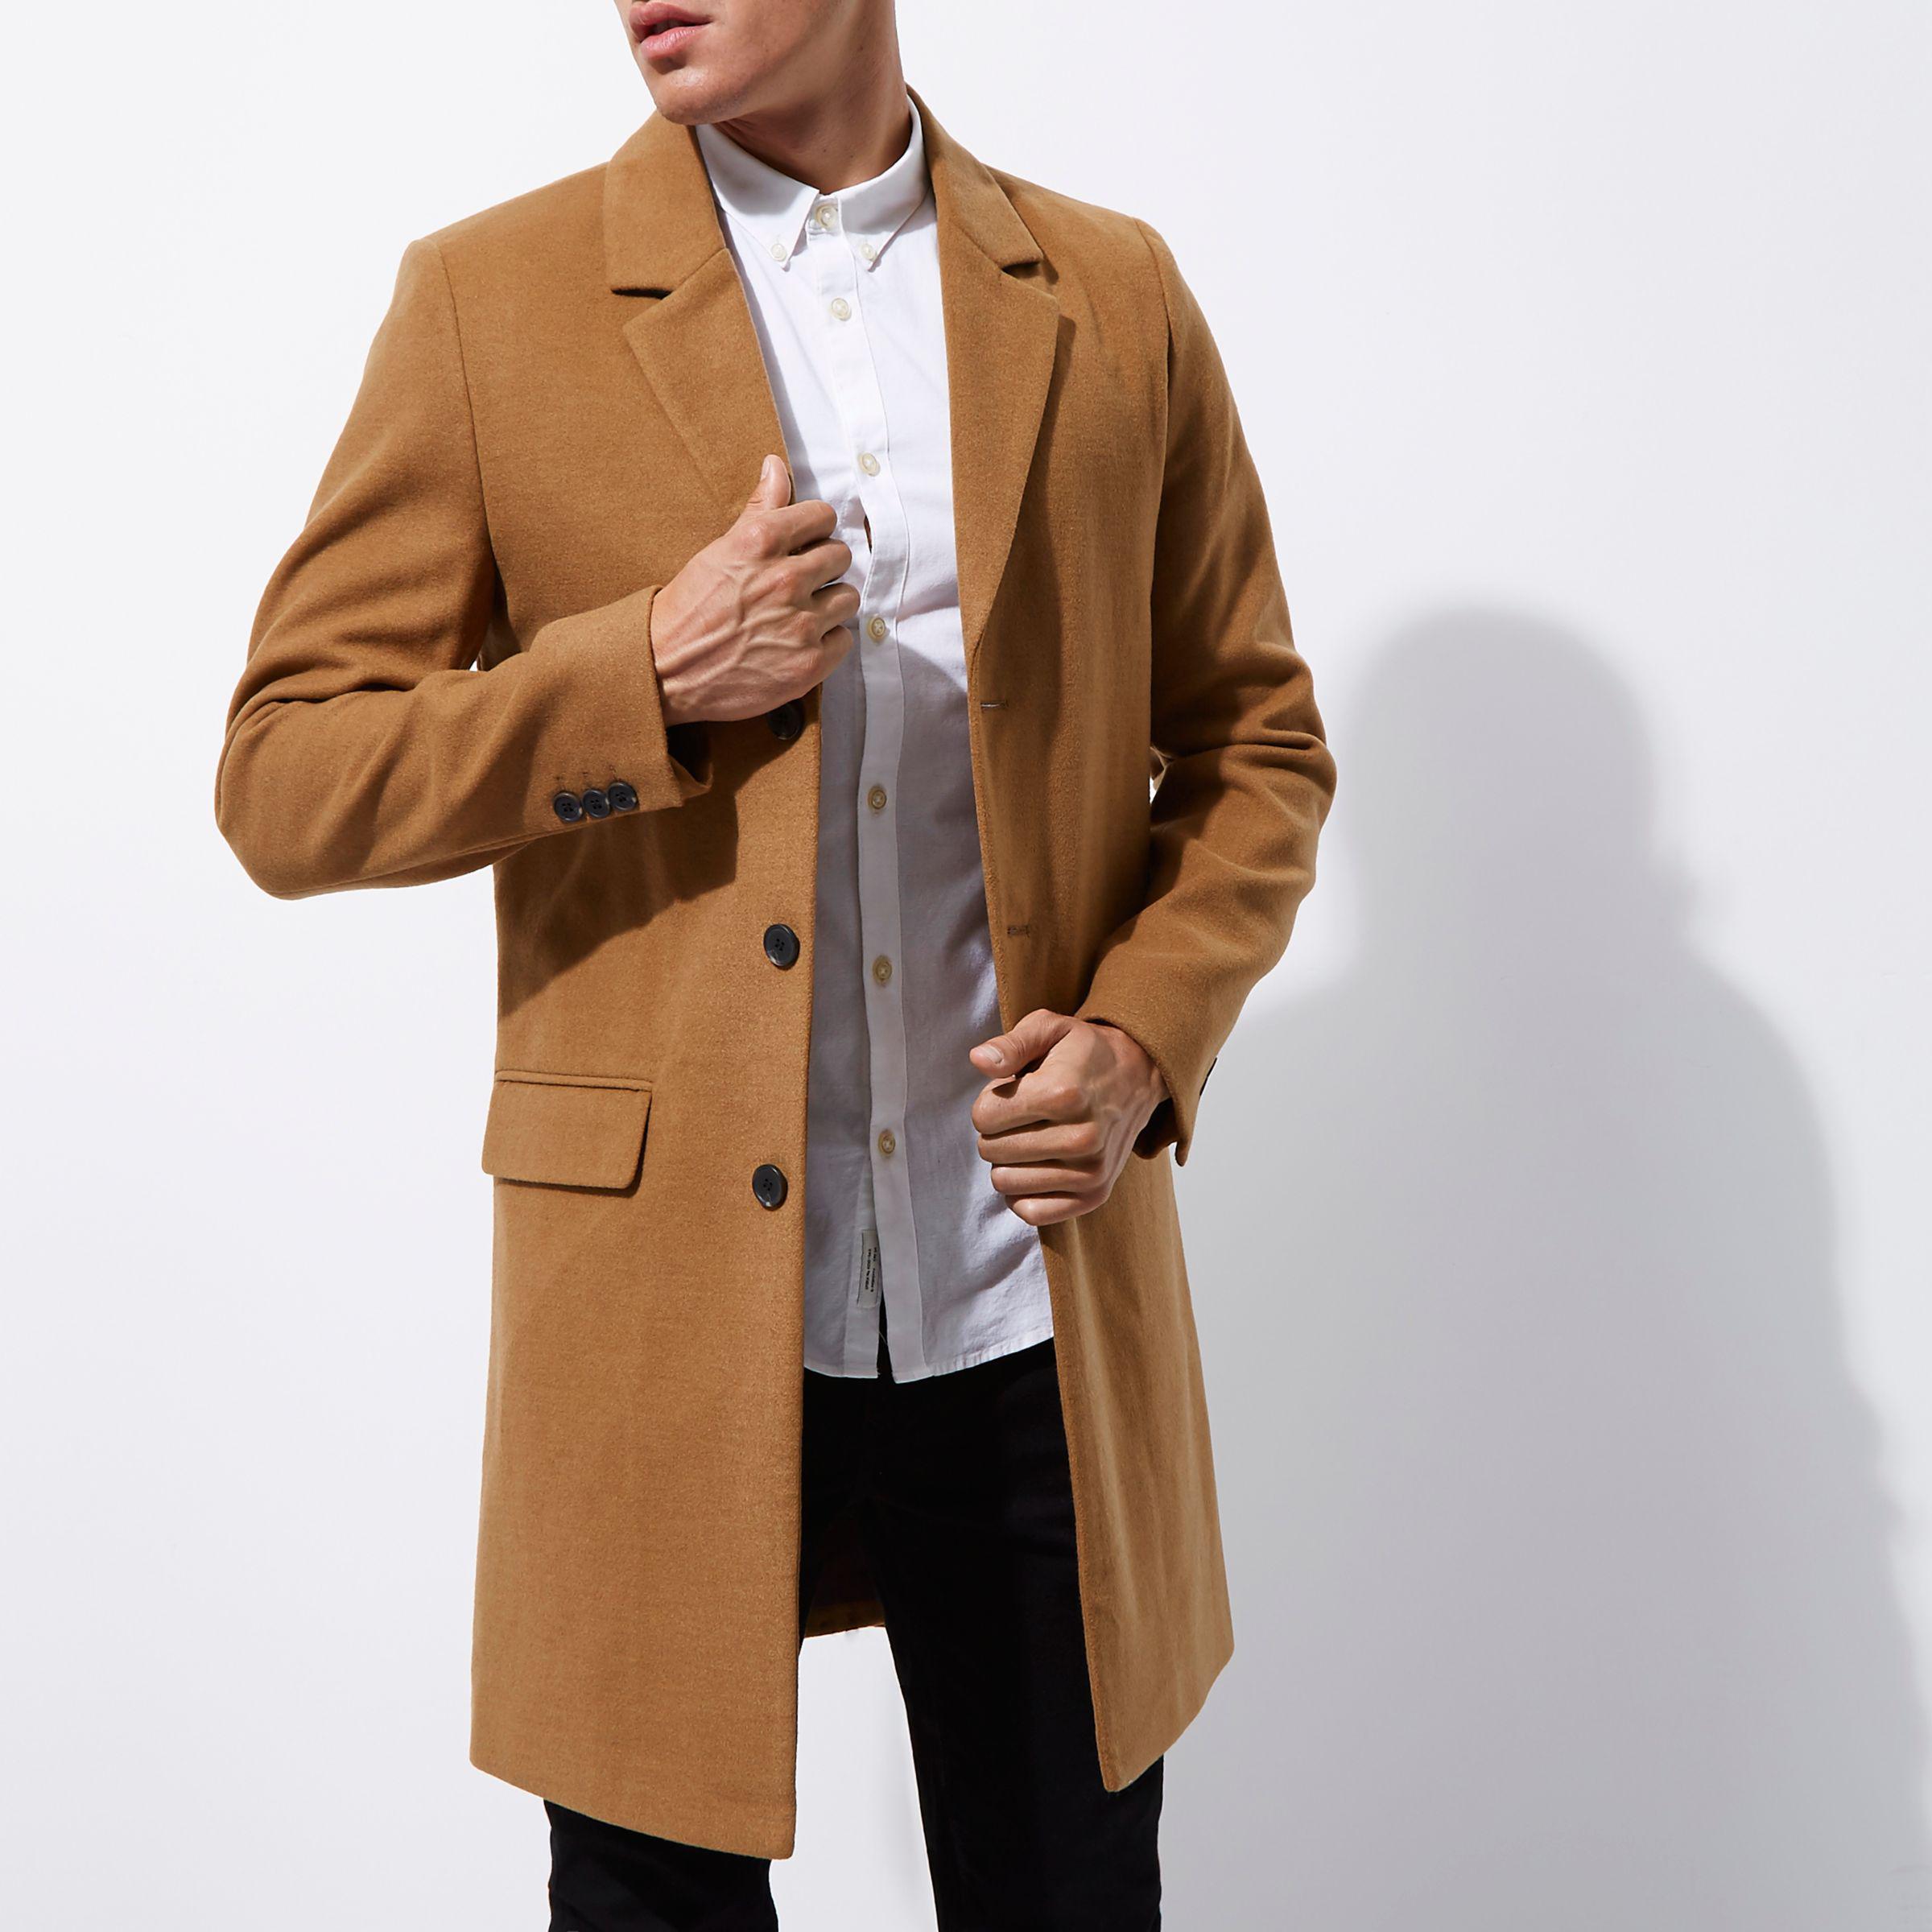 River Island Synthetic Camel Smart Overcoat in Brown for Men - Lyst